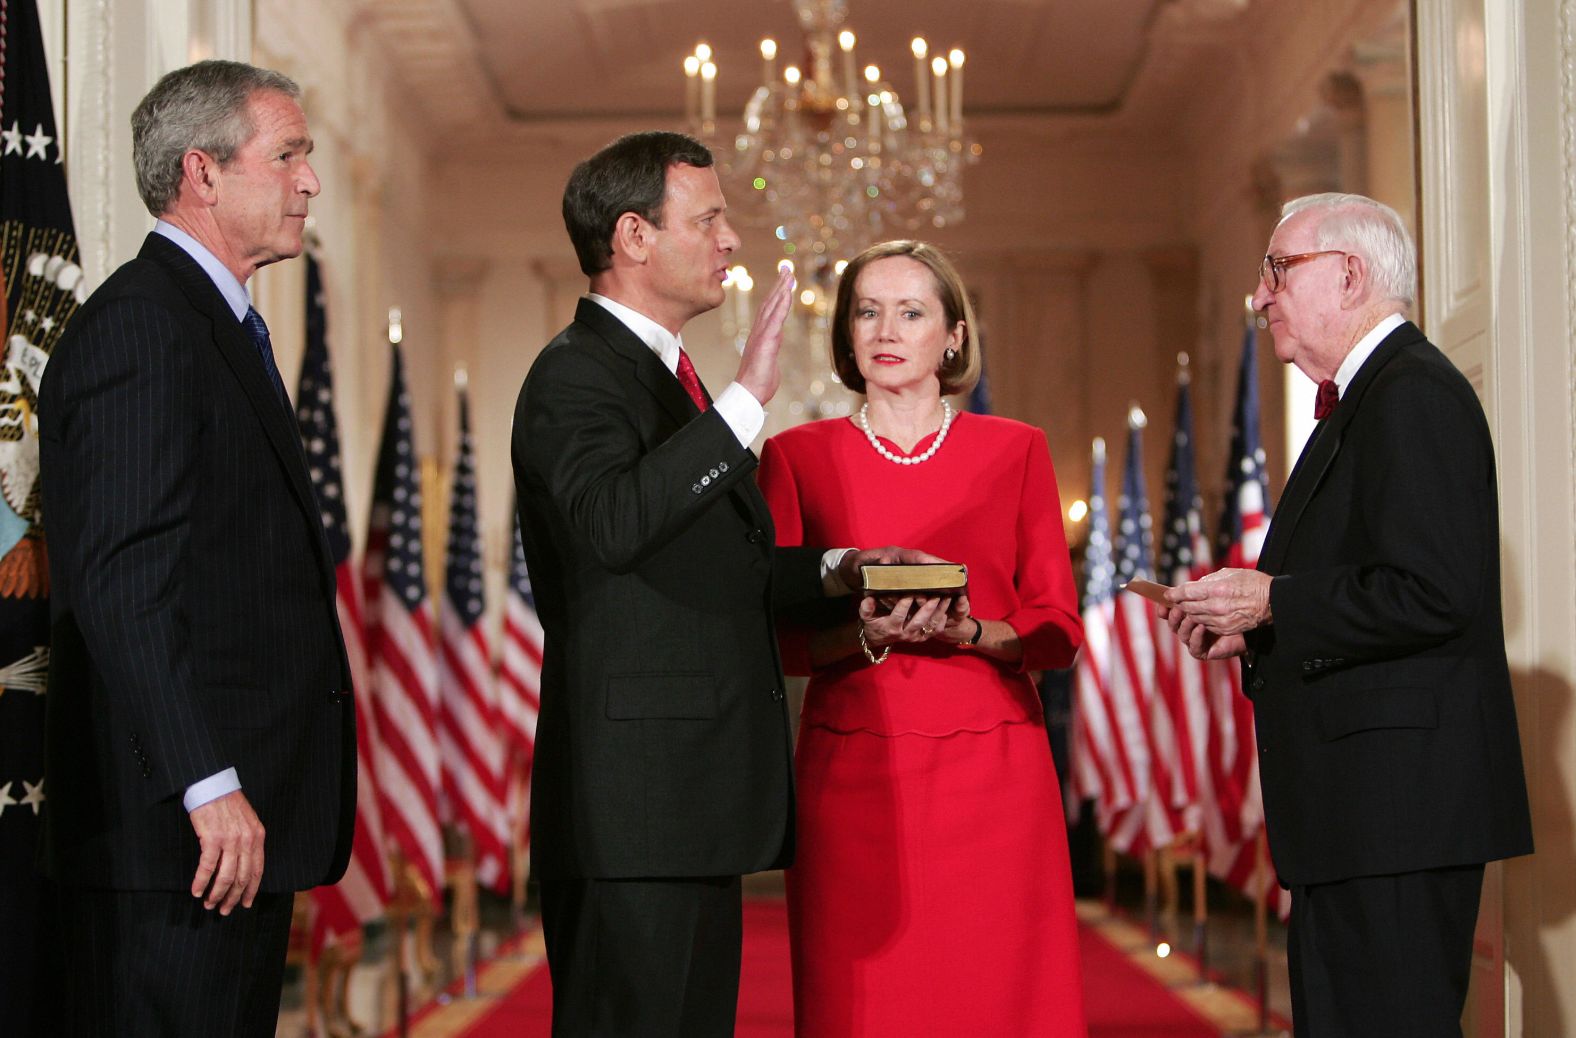 Judge John Roberts, second left, is sworn in as US Supreme Court Chief Justice on September 29, 2005, at the White House by Stevens, right, before his wife, Jane, second right, and President George W. Bush.